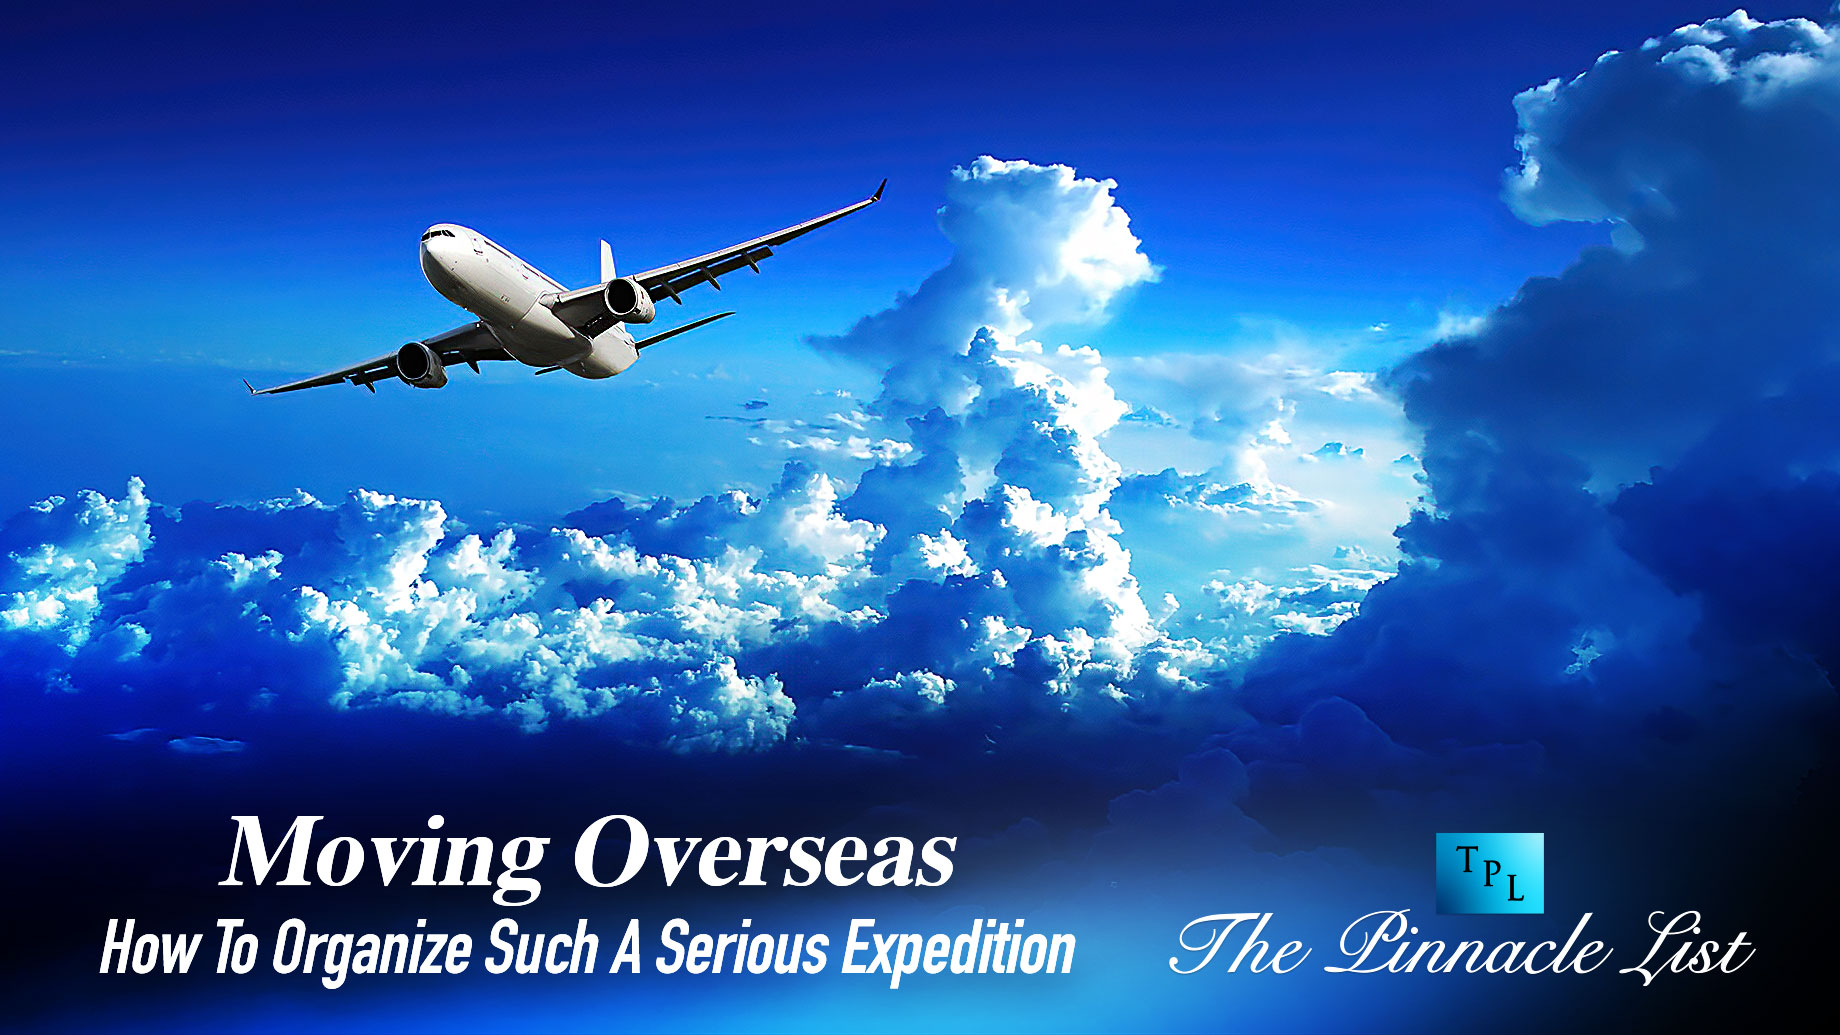 Moving Overseas: How To Organize Such A Serious Expedition